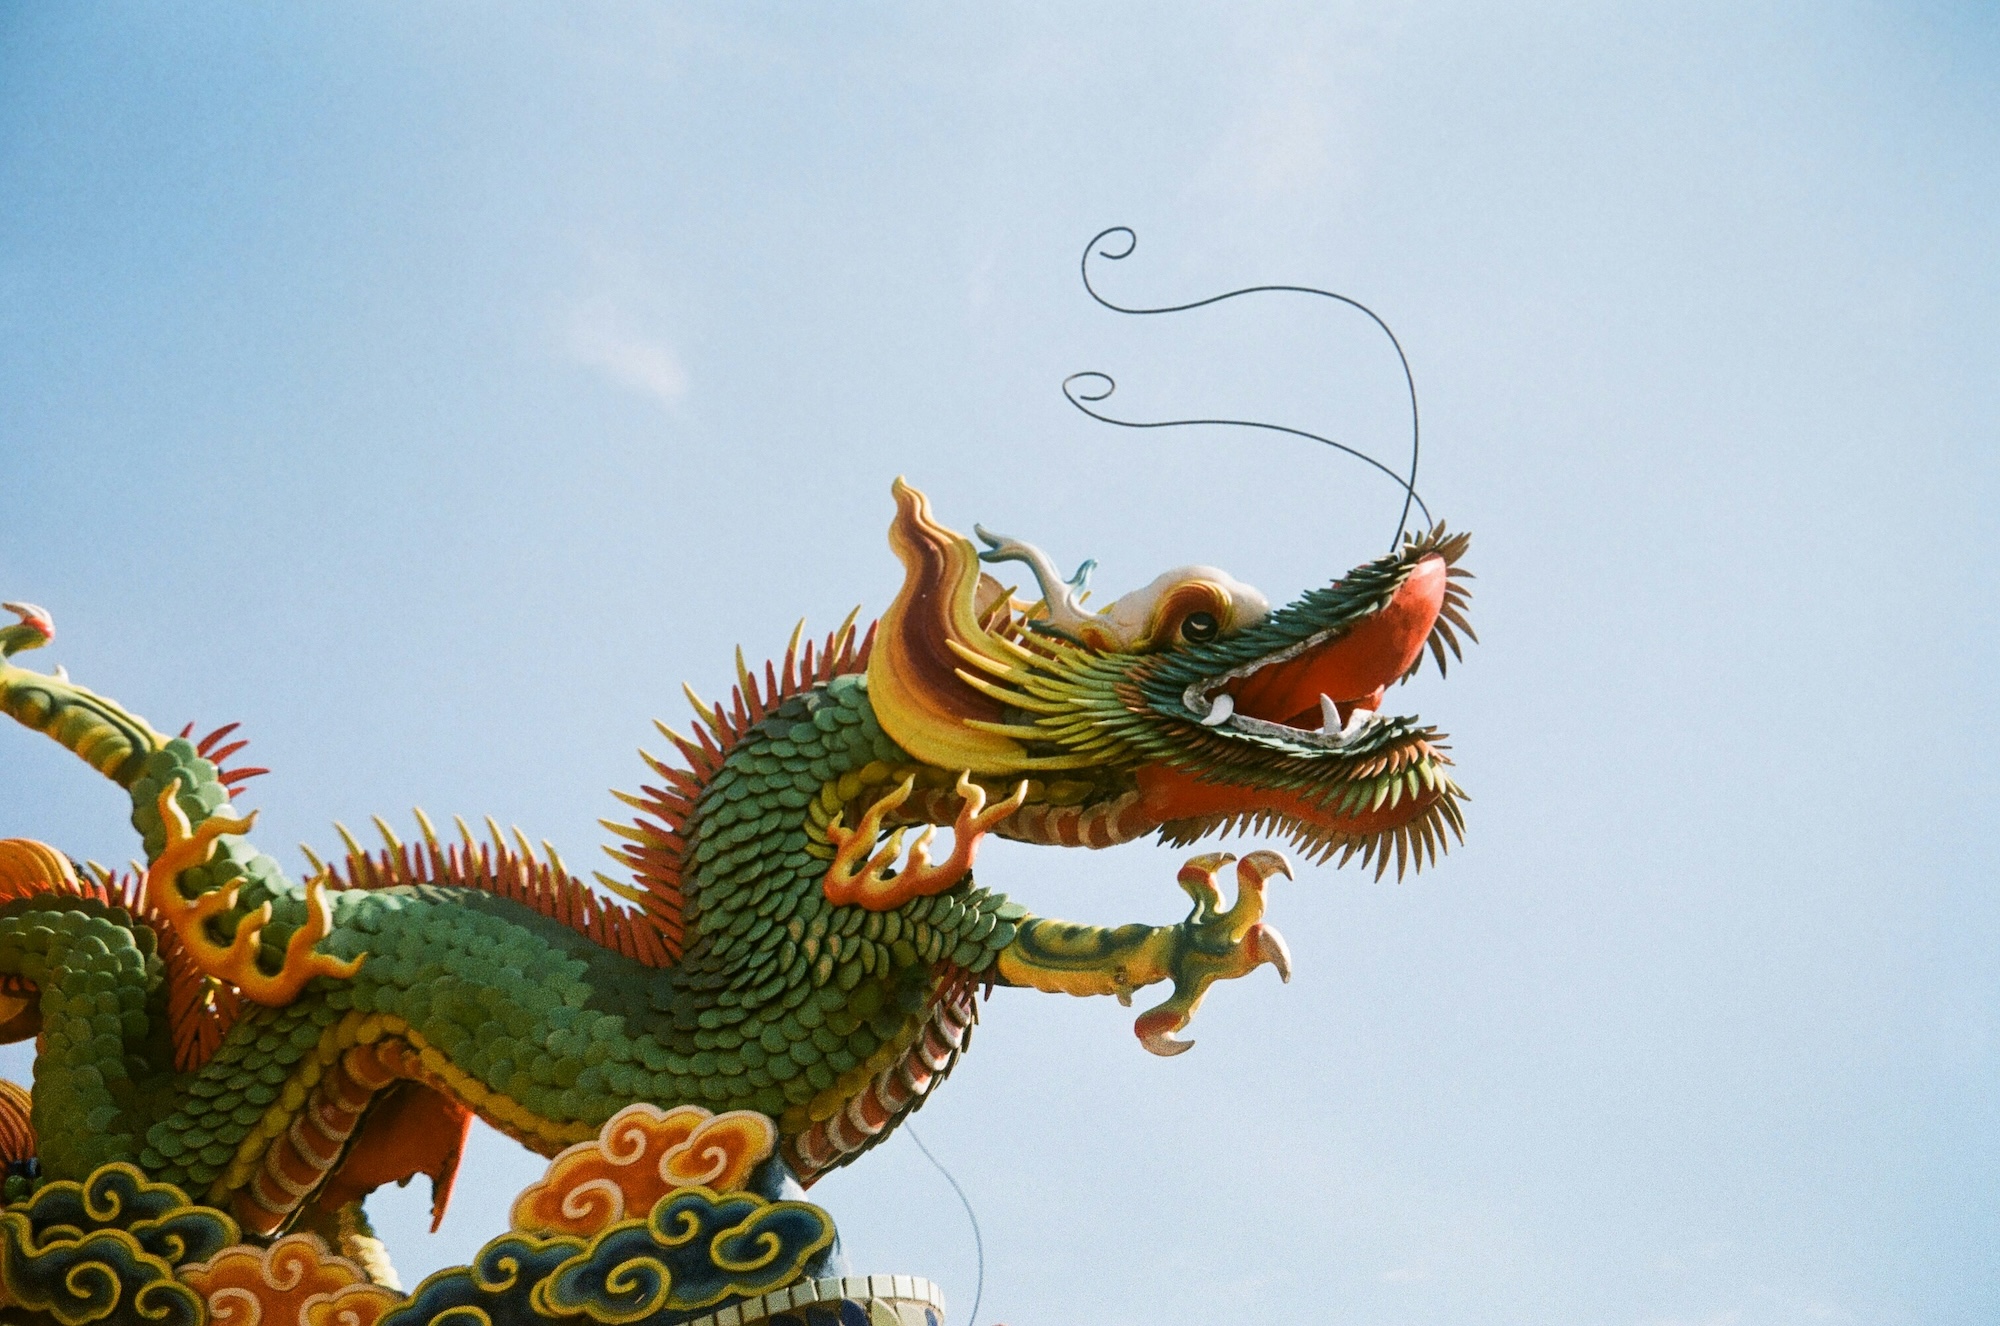 The distinct appearance of Chinese dragons seems to combine elements of familiar creatures like tigers, snakes, eagles and carp